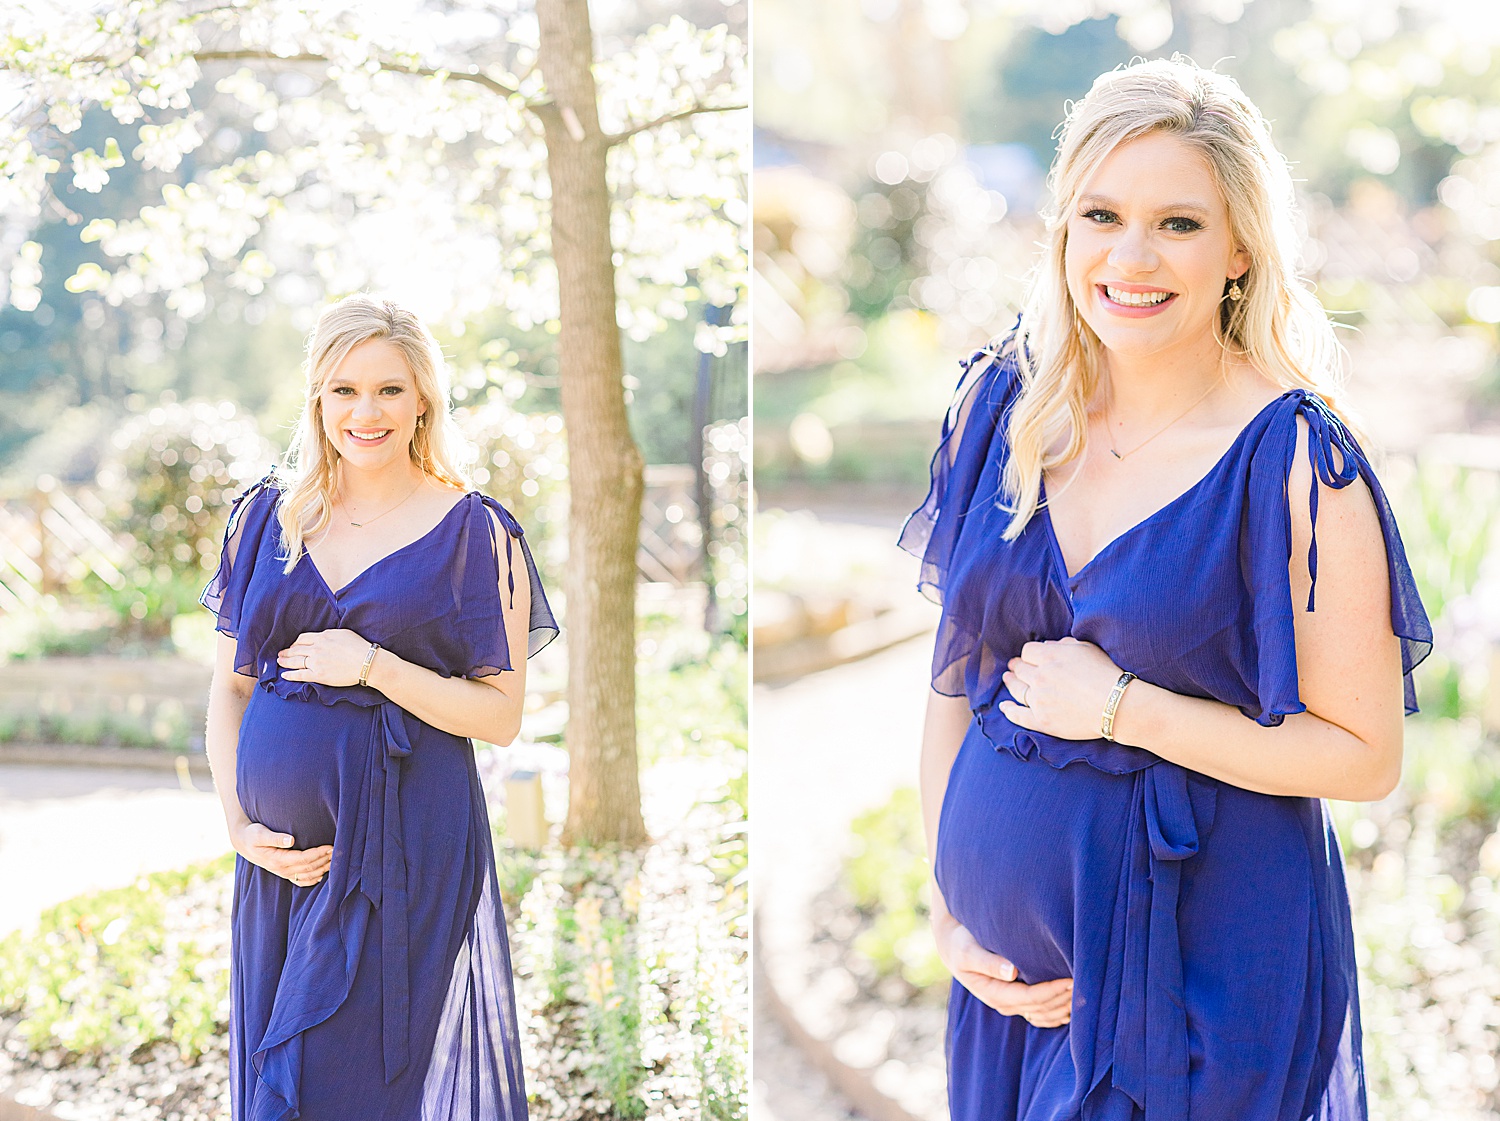 mom-to-be in royal blue dress during Maternity Session at Birmingham Botanical Gardens